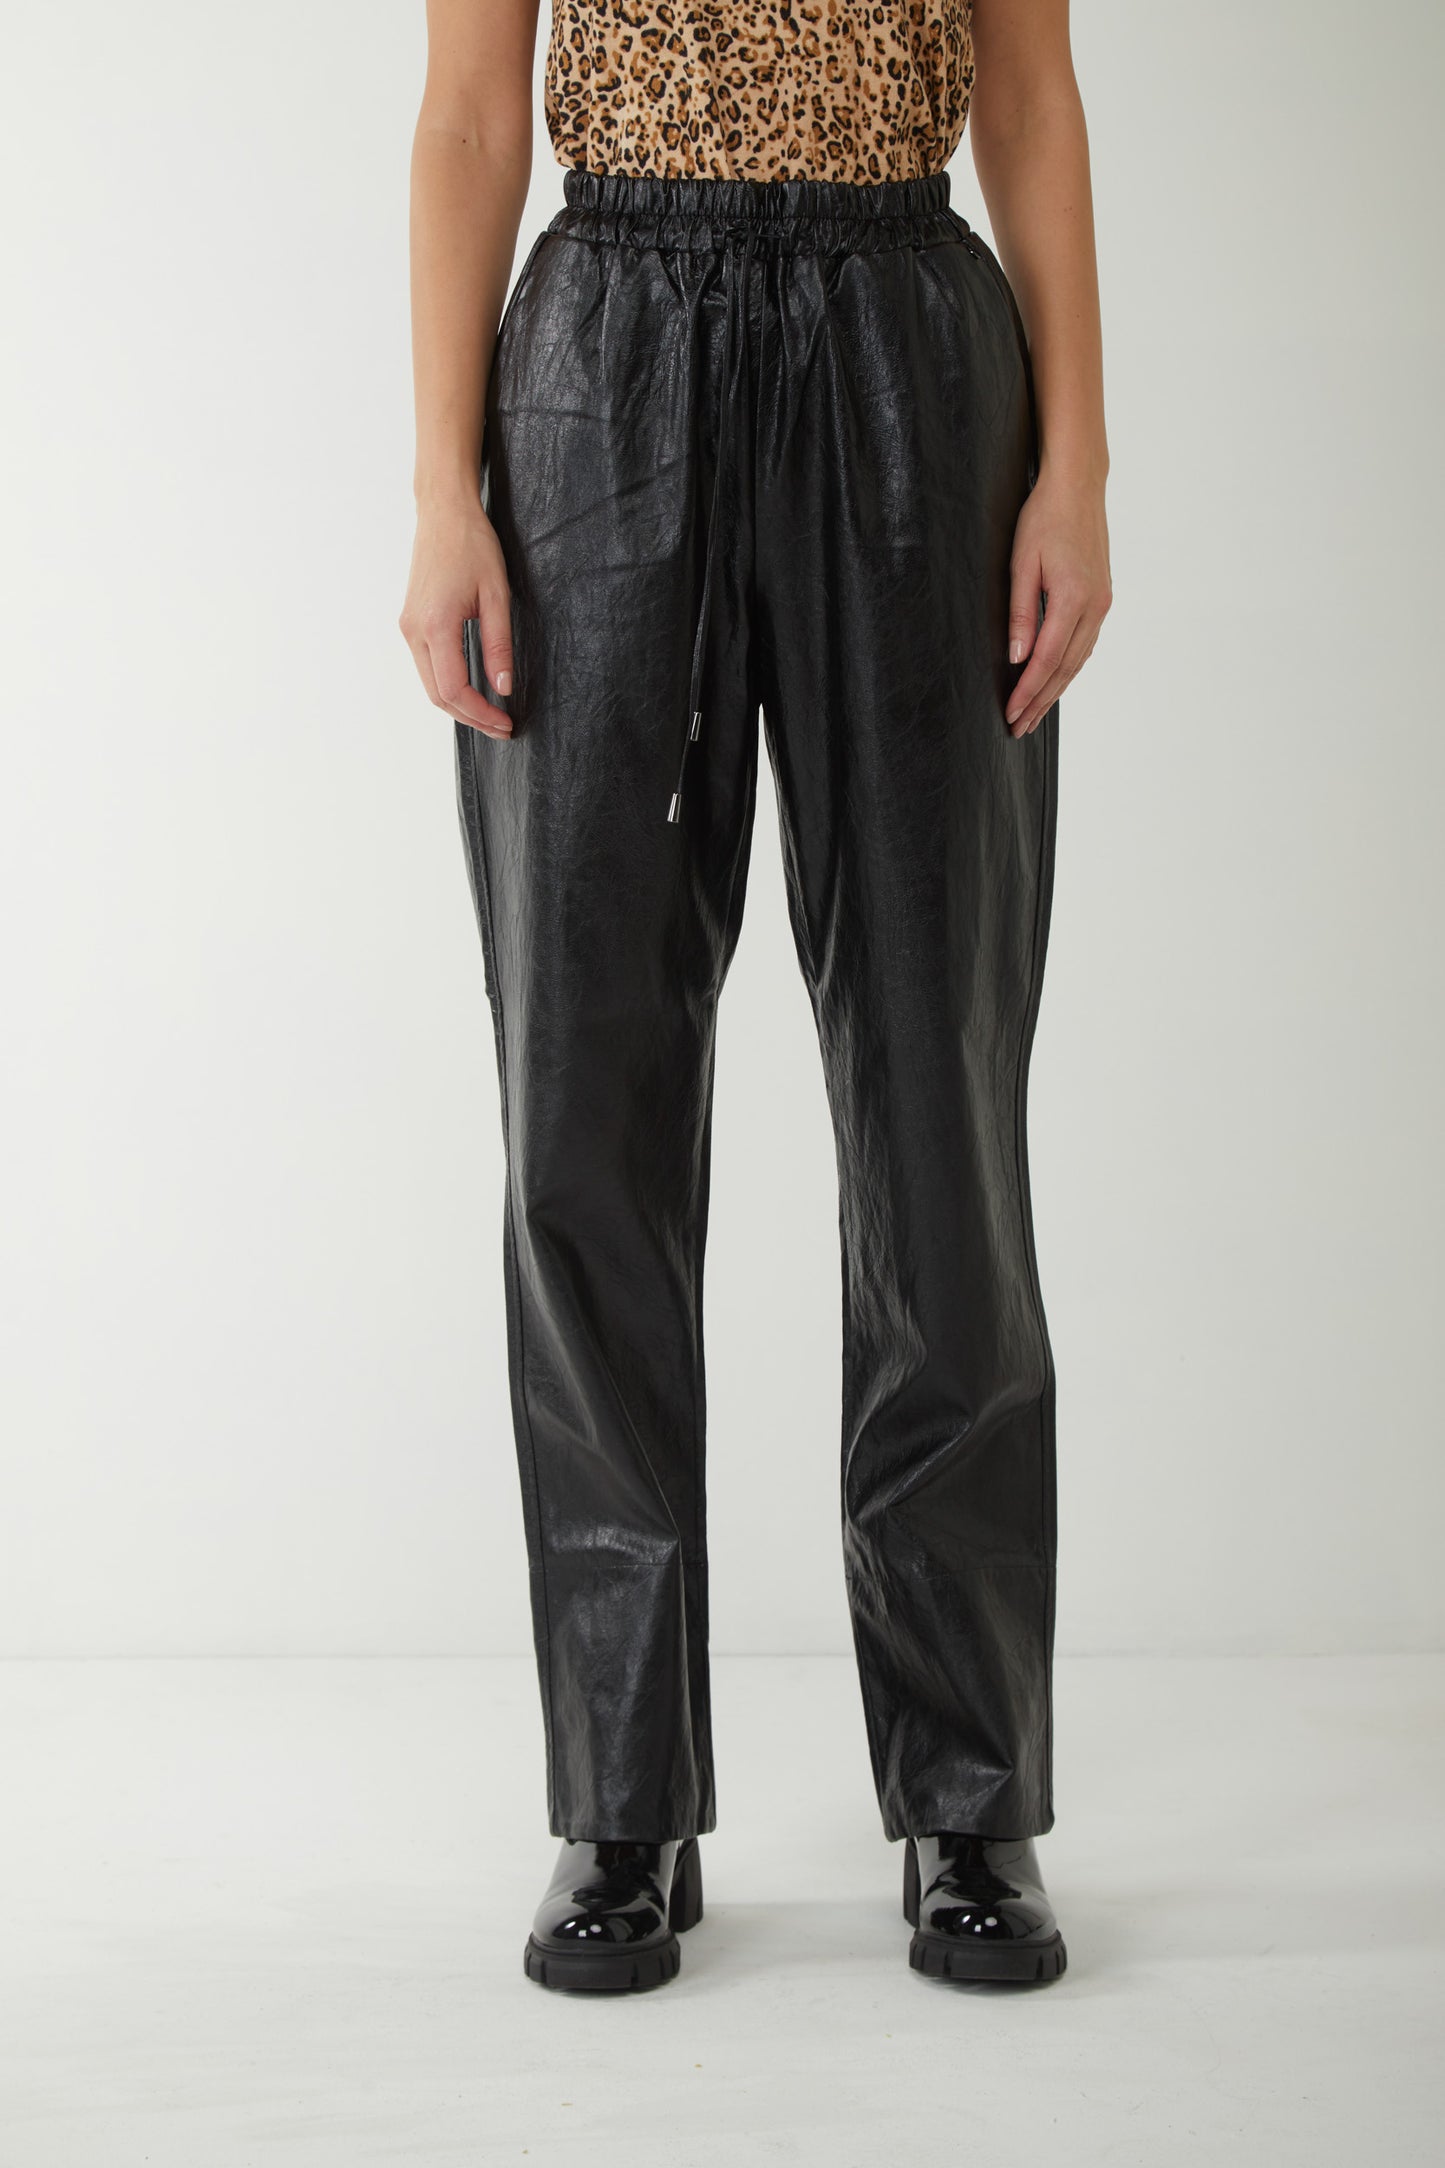 TWINSET Pants in Black Faux Leather